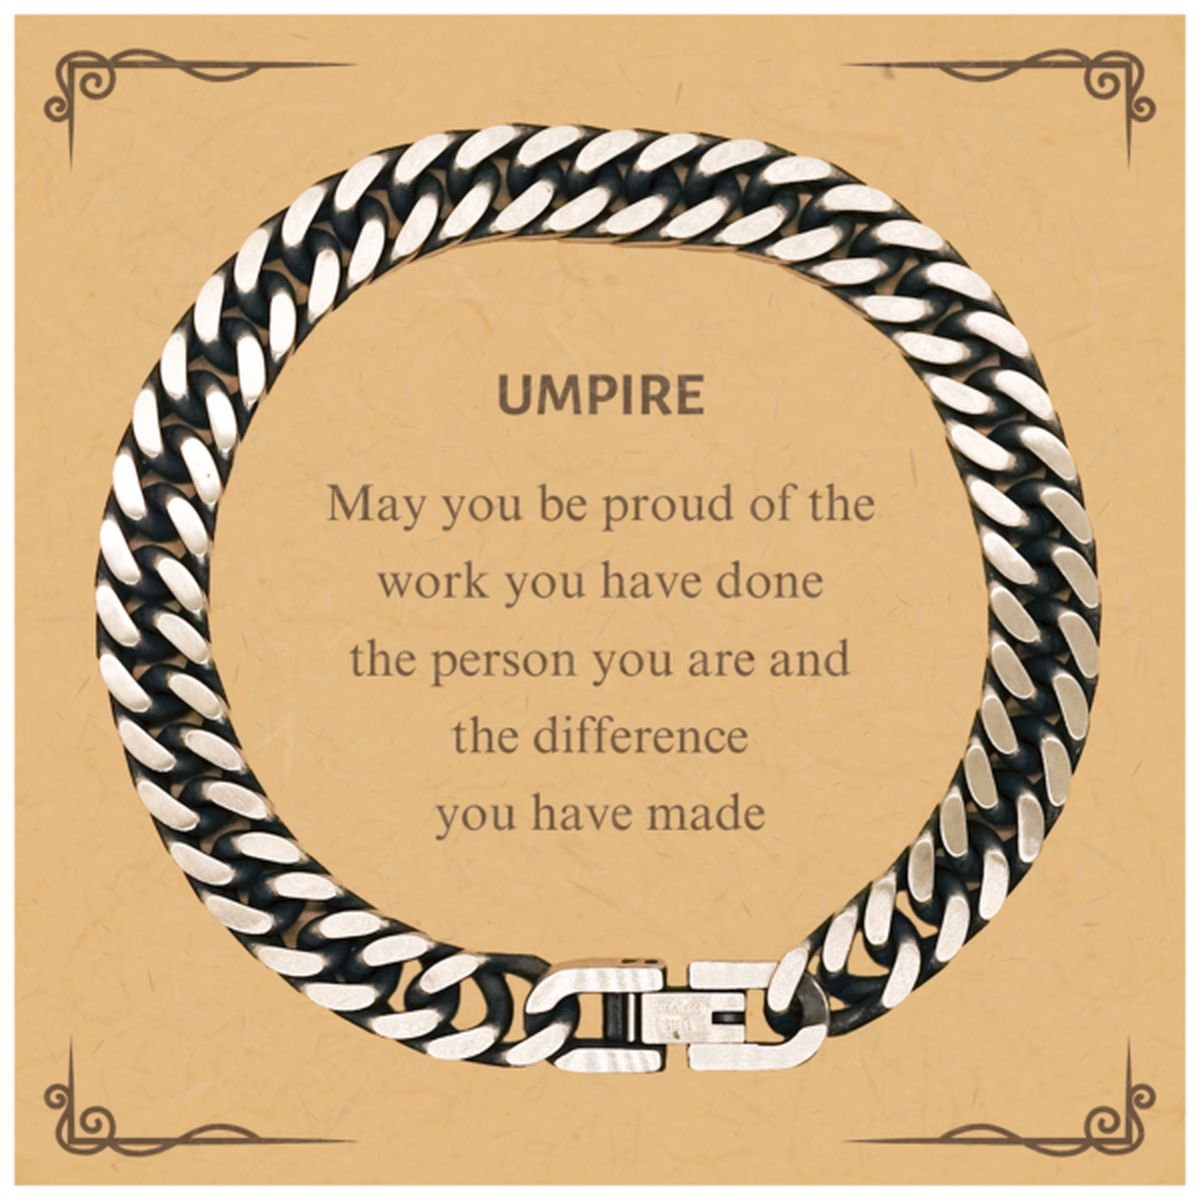 Umpire May you be proud of the work you have done, Retirement Umpire Cuban Link Chain Bracelet for Colleague Appreciation Gifts Amazing for Umpire